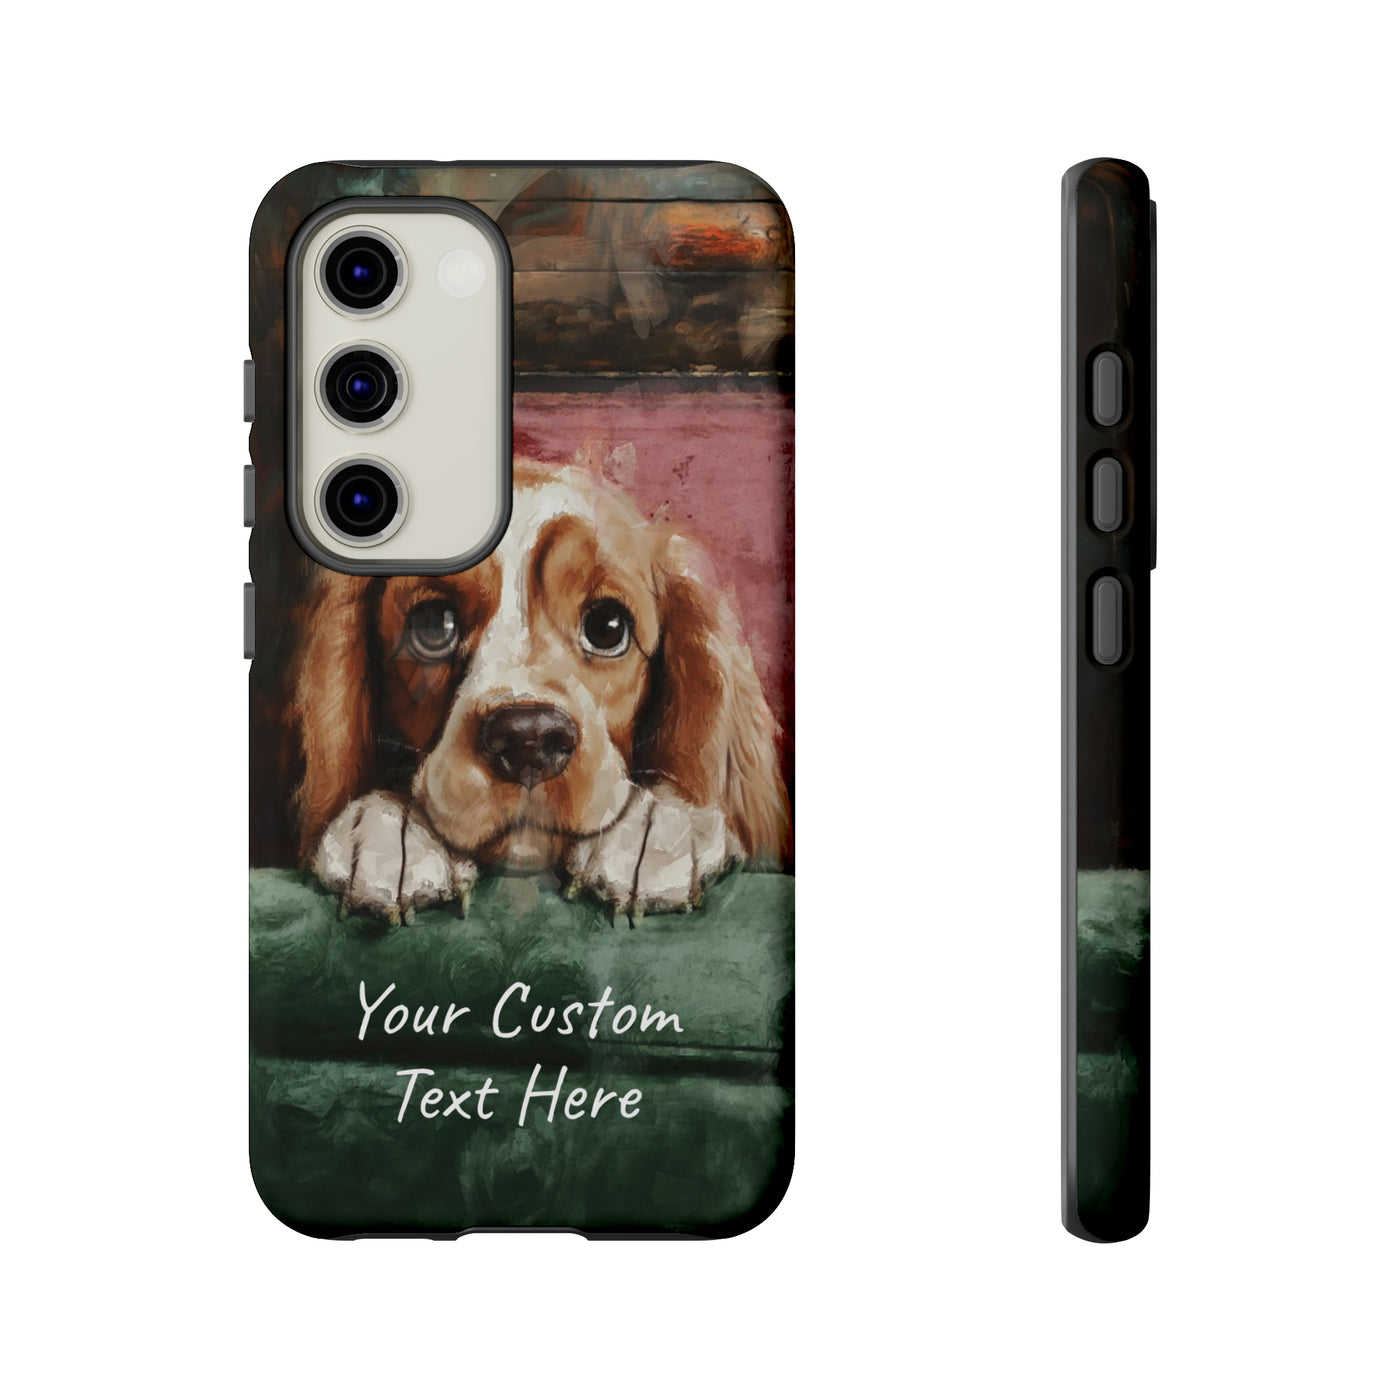 Personalize this Cute Samsung Phone Case | Cocker Spaniel Dog Samsung Phone Case | Galaxy S23, S22, S21, S20 | Customized Samsung Case